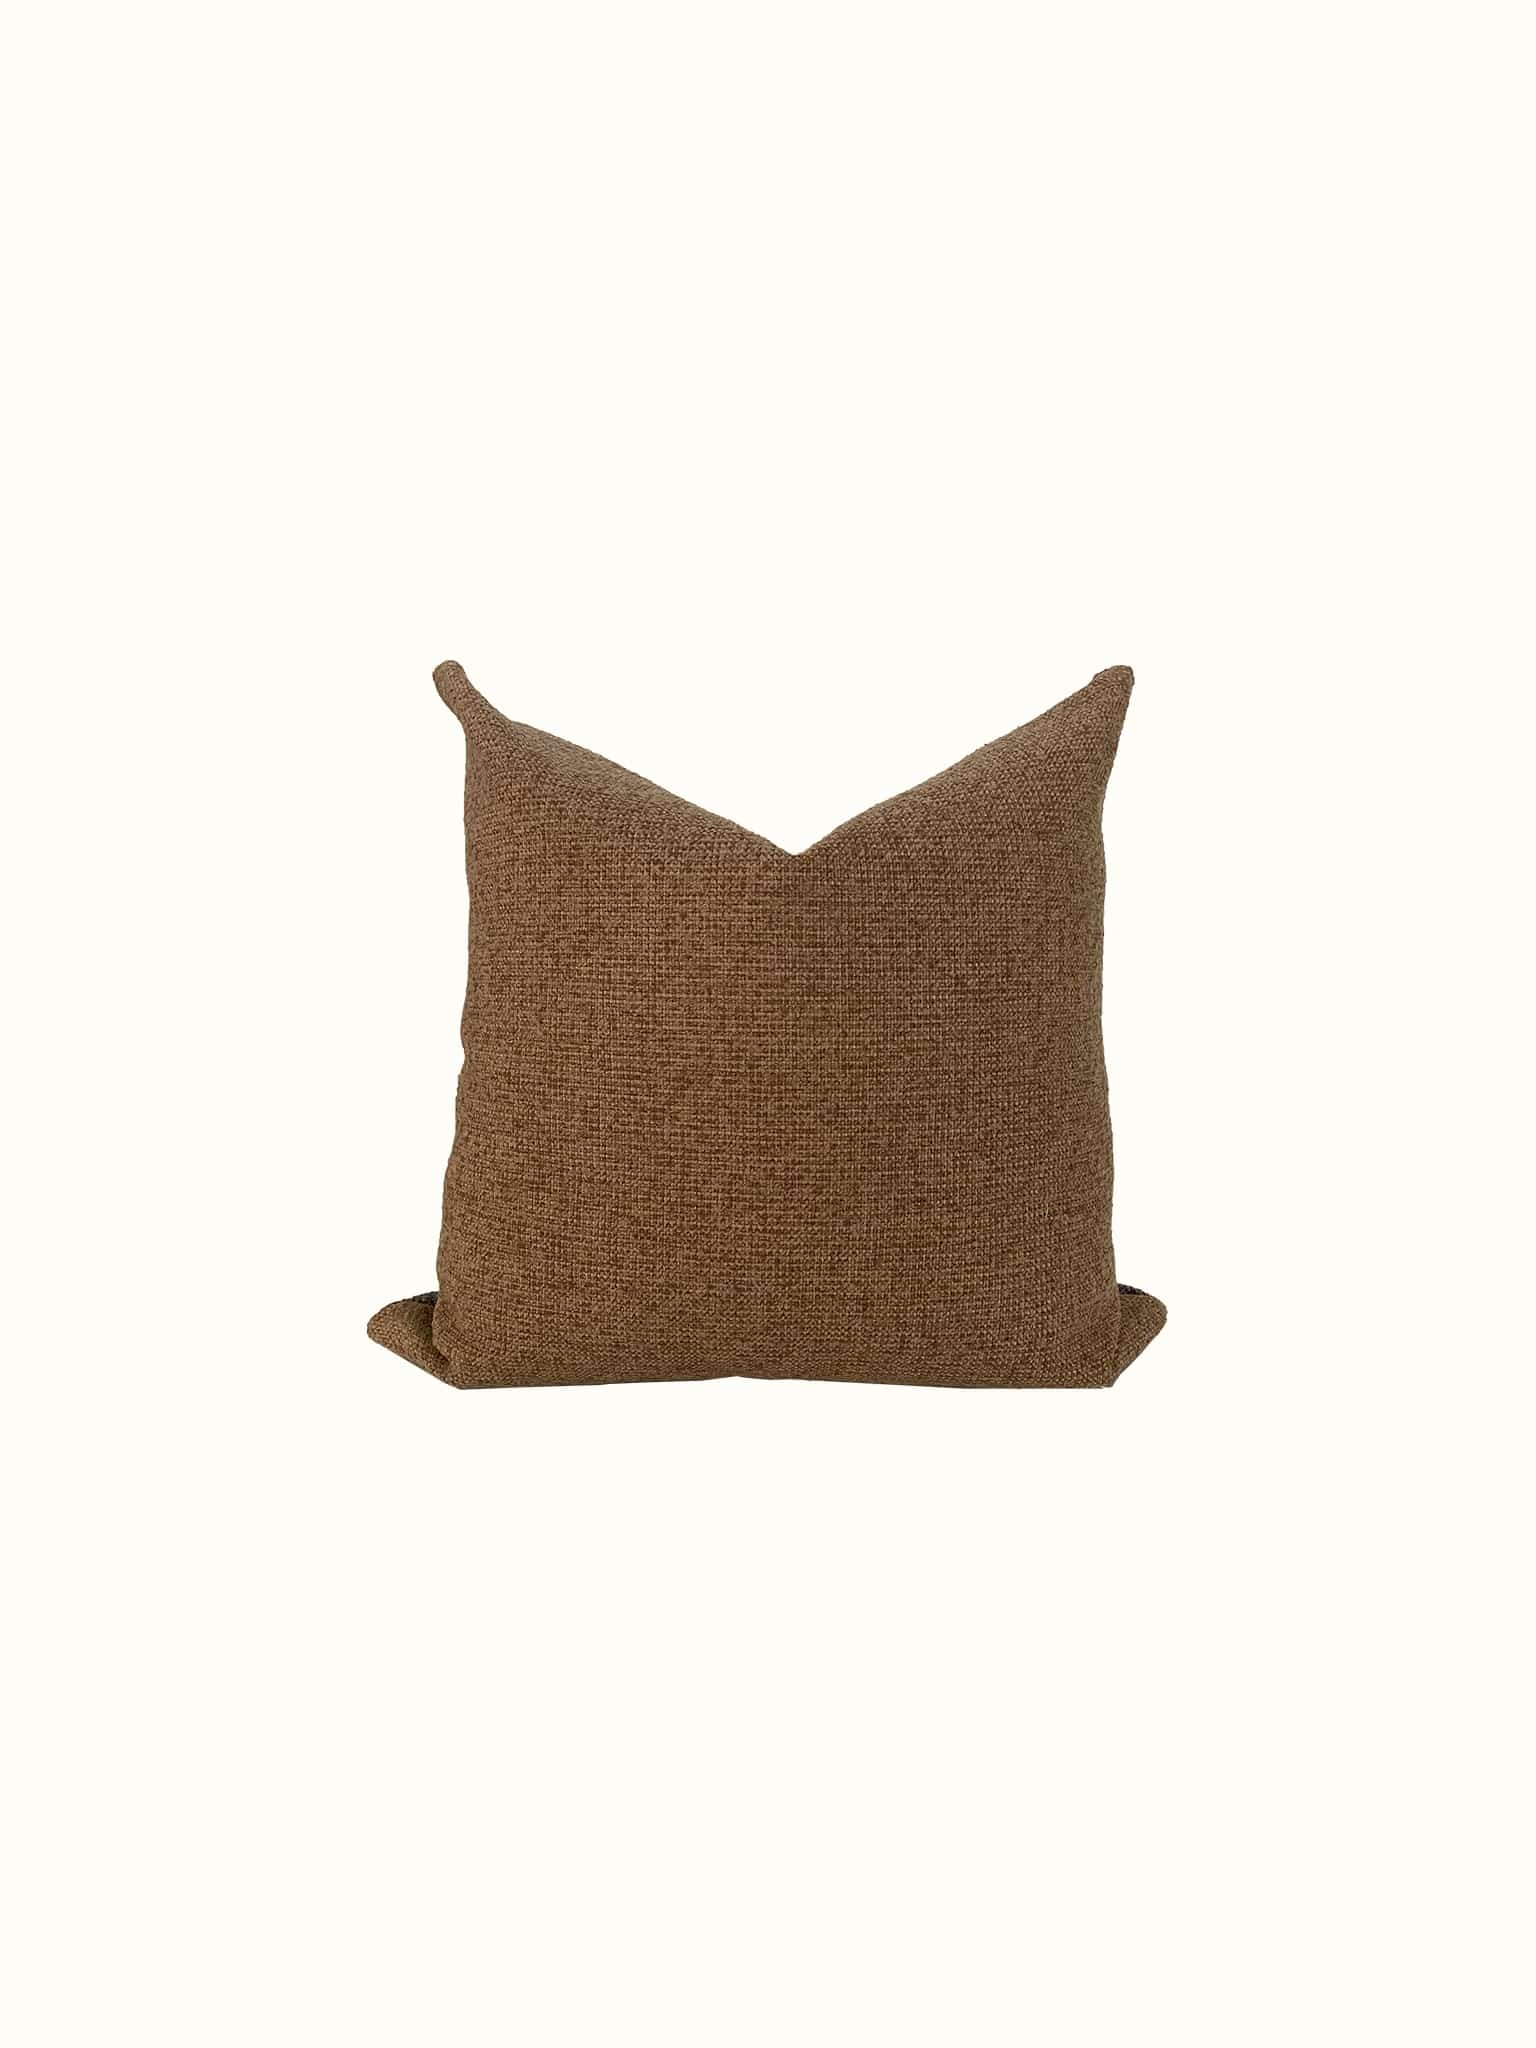 A low-pile boucle throw pillow cover in sand tan color brings a midcentury modern flair at Cielle Home